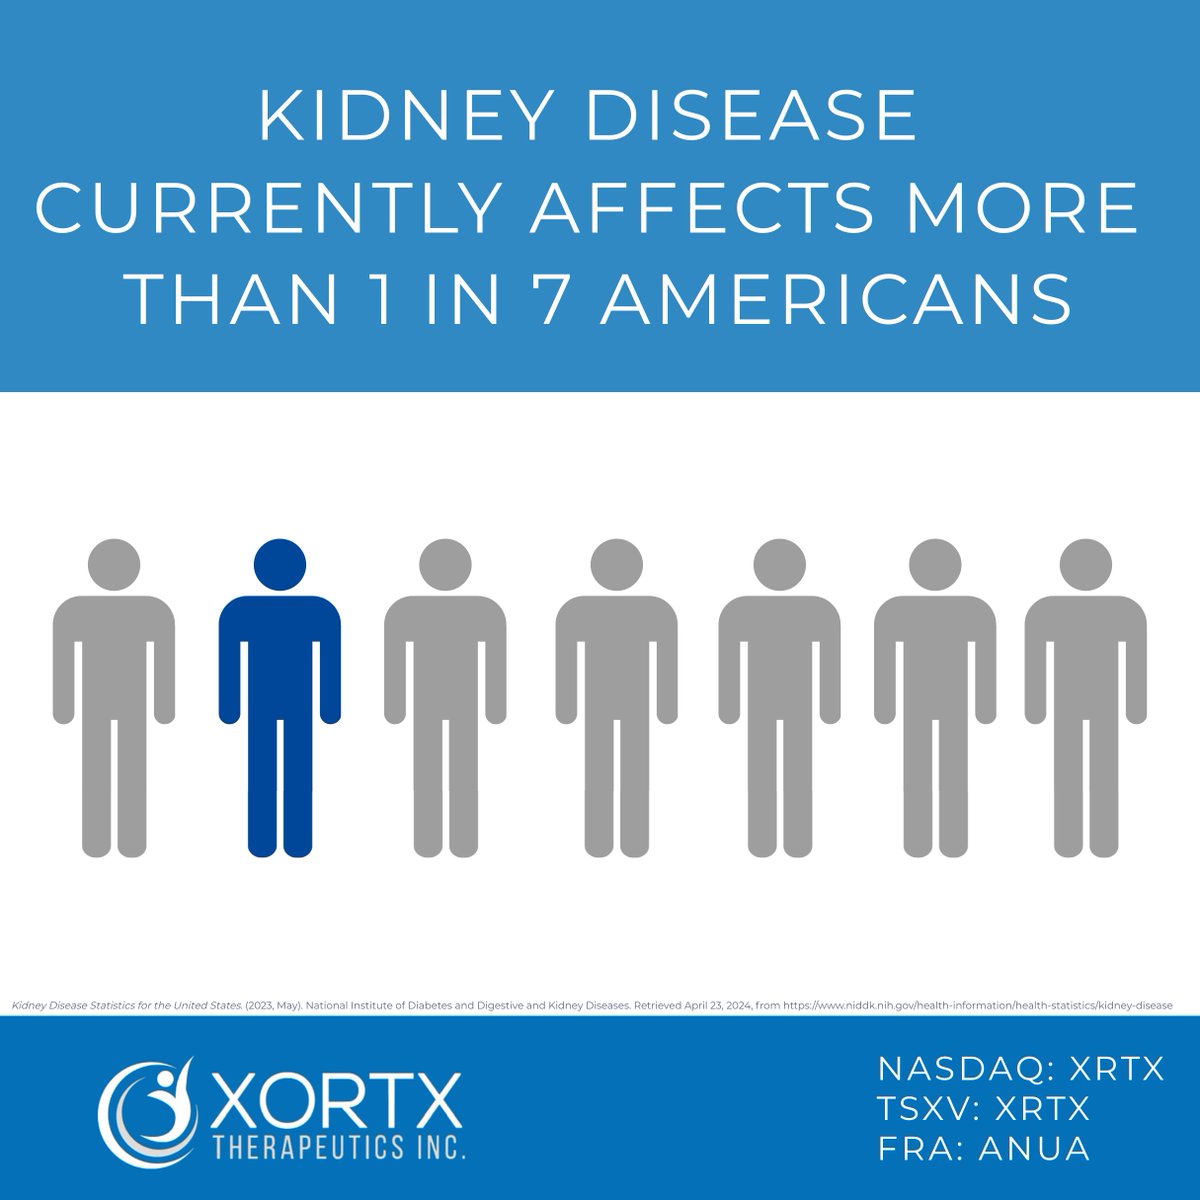 Kidney disease currently affects more than 1 in 7 Americans. 

Xortx Therapeutics is pioneering new therapies for progressive kidney disease. 

$XRTX #KidneyDisease #APDKD